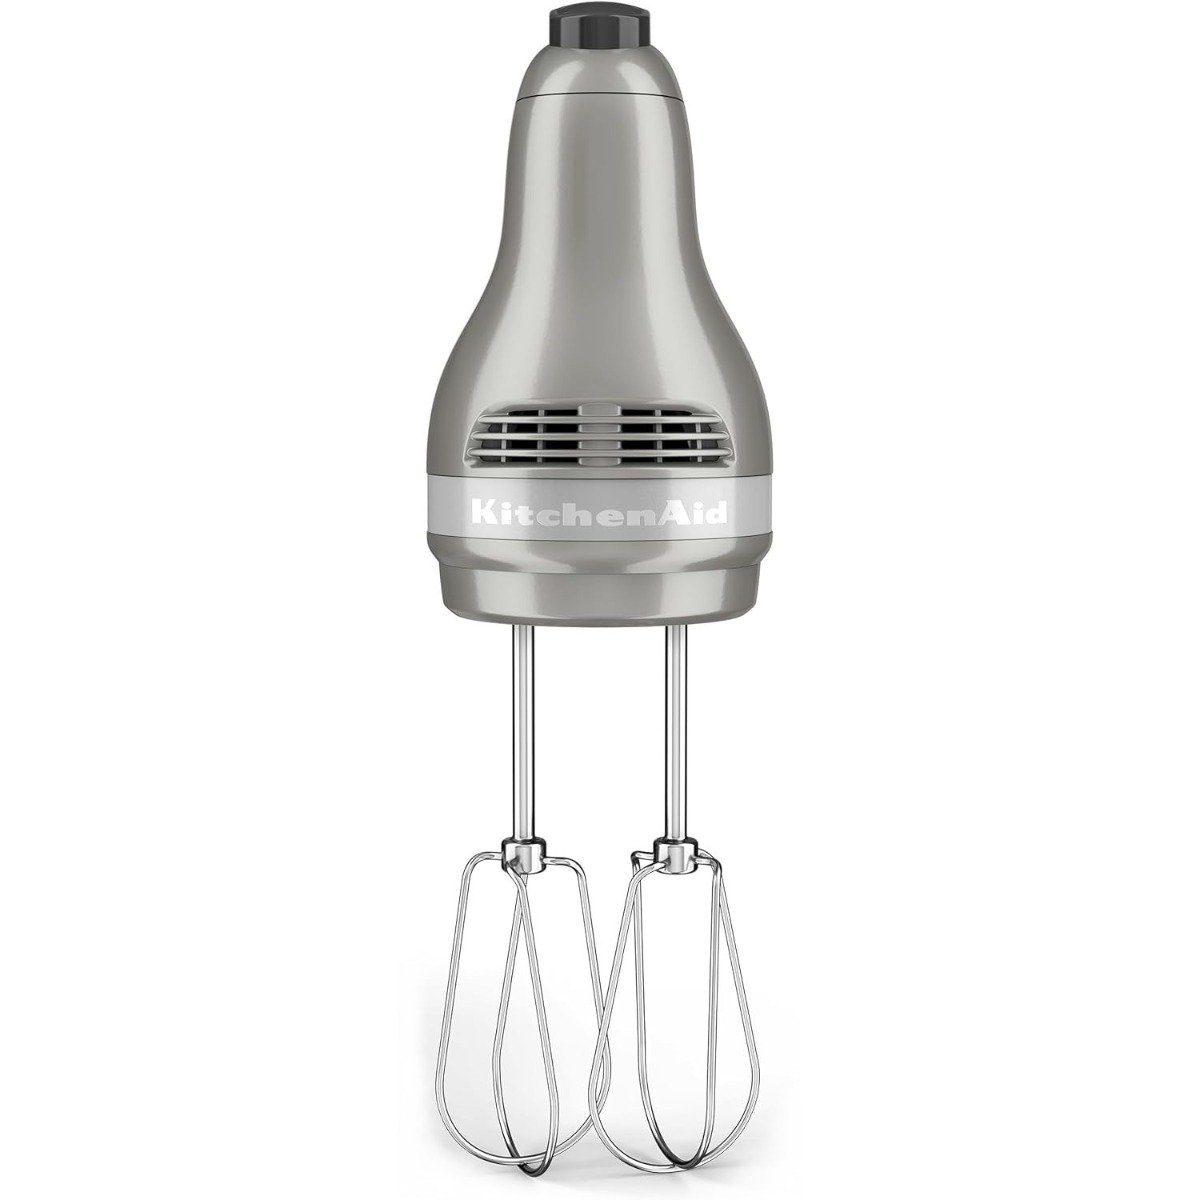 KitchenAid 5-Speed Ultra Power Hand Mixer | Contour Silver - image 3 of 4